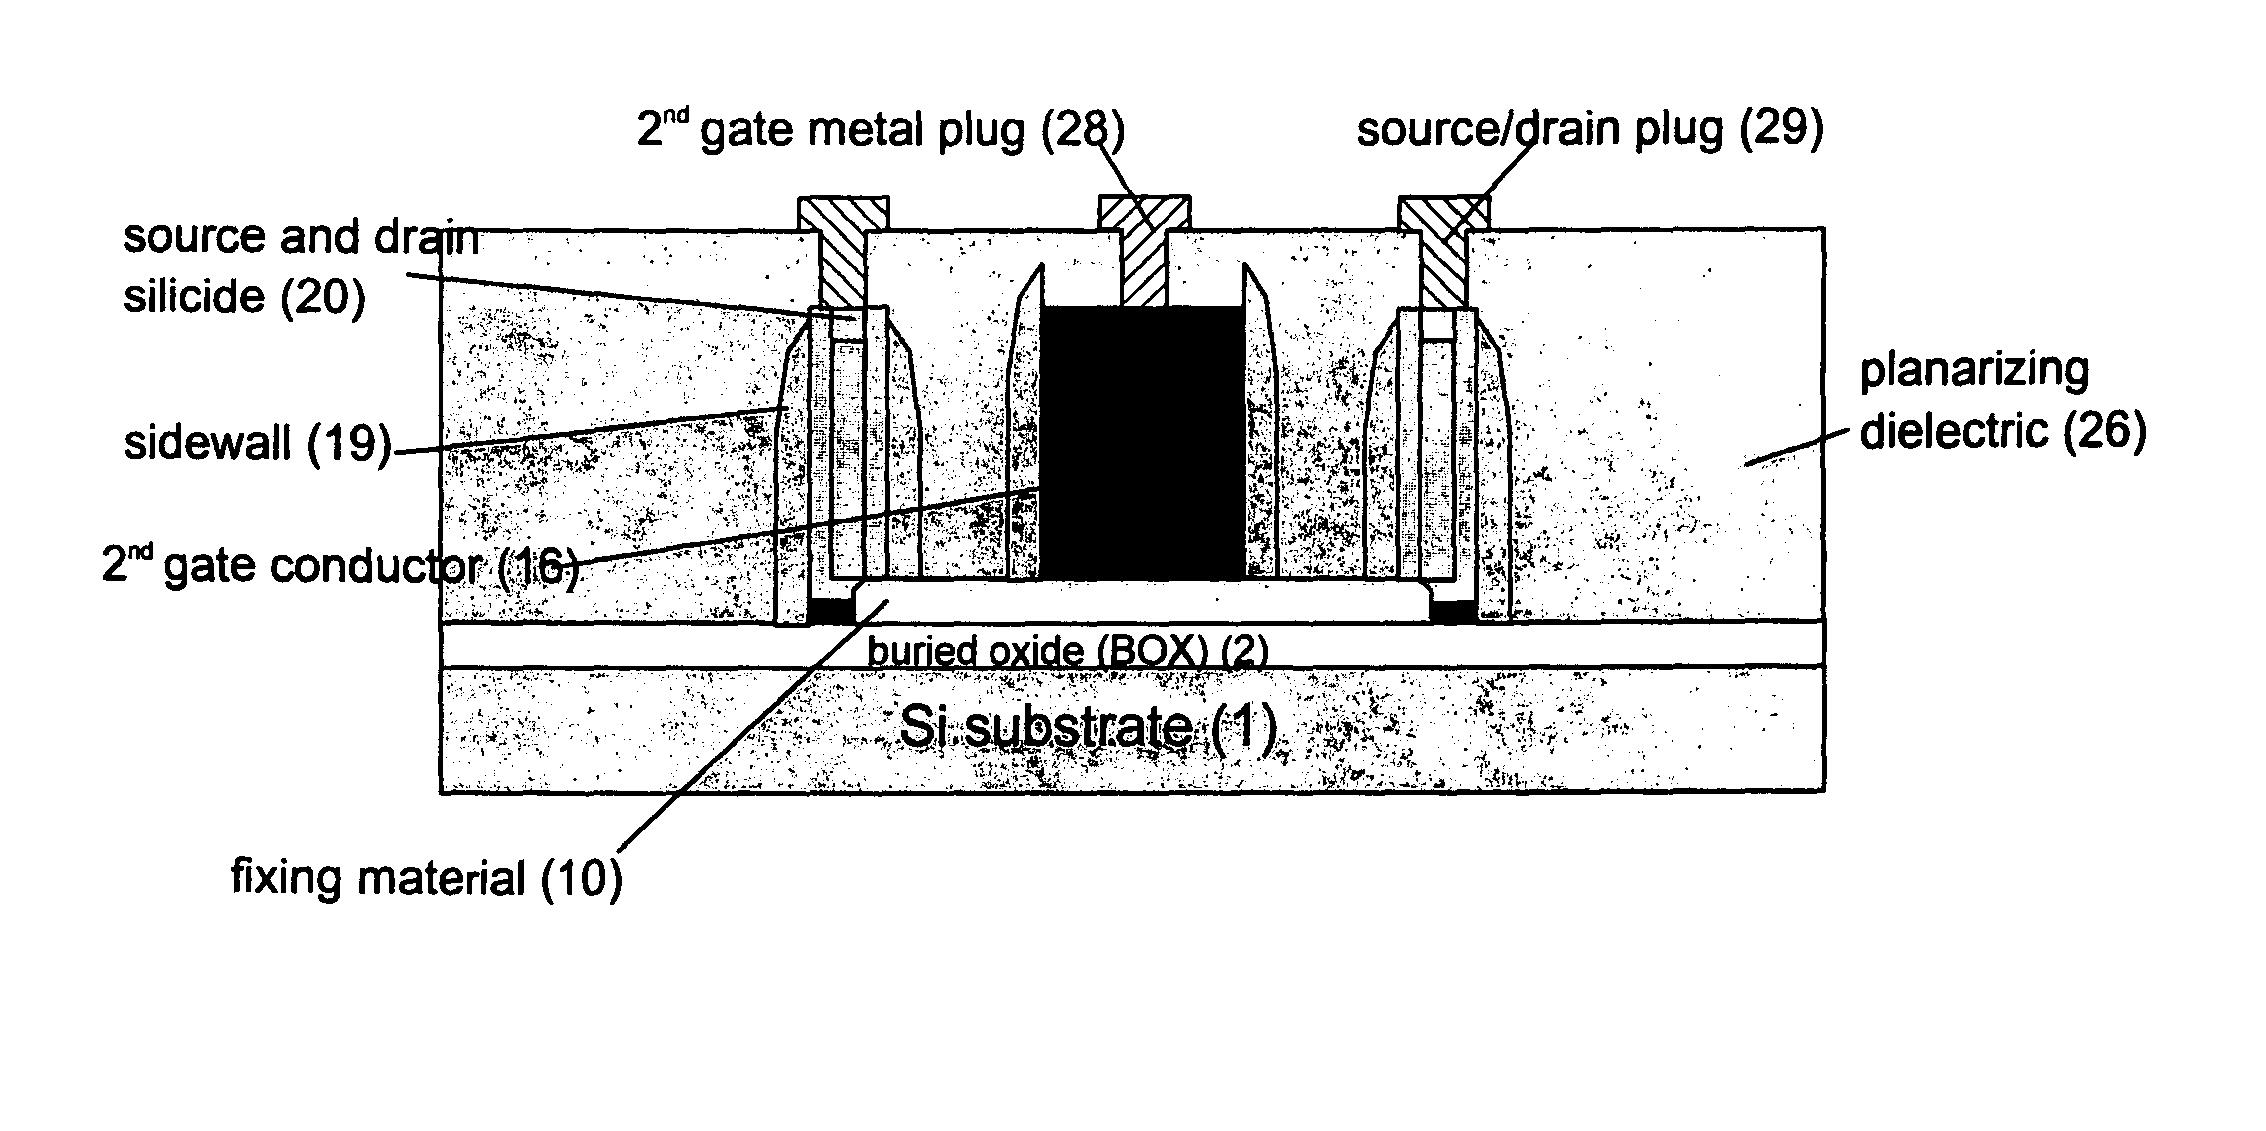 Strained-channel fin field effect transistor (FET) with a uniform channel thickness and separate gates